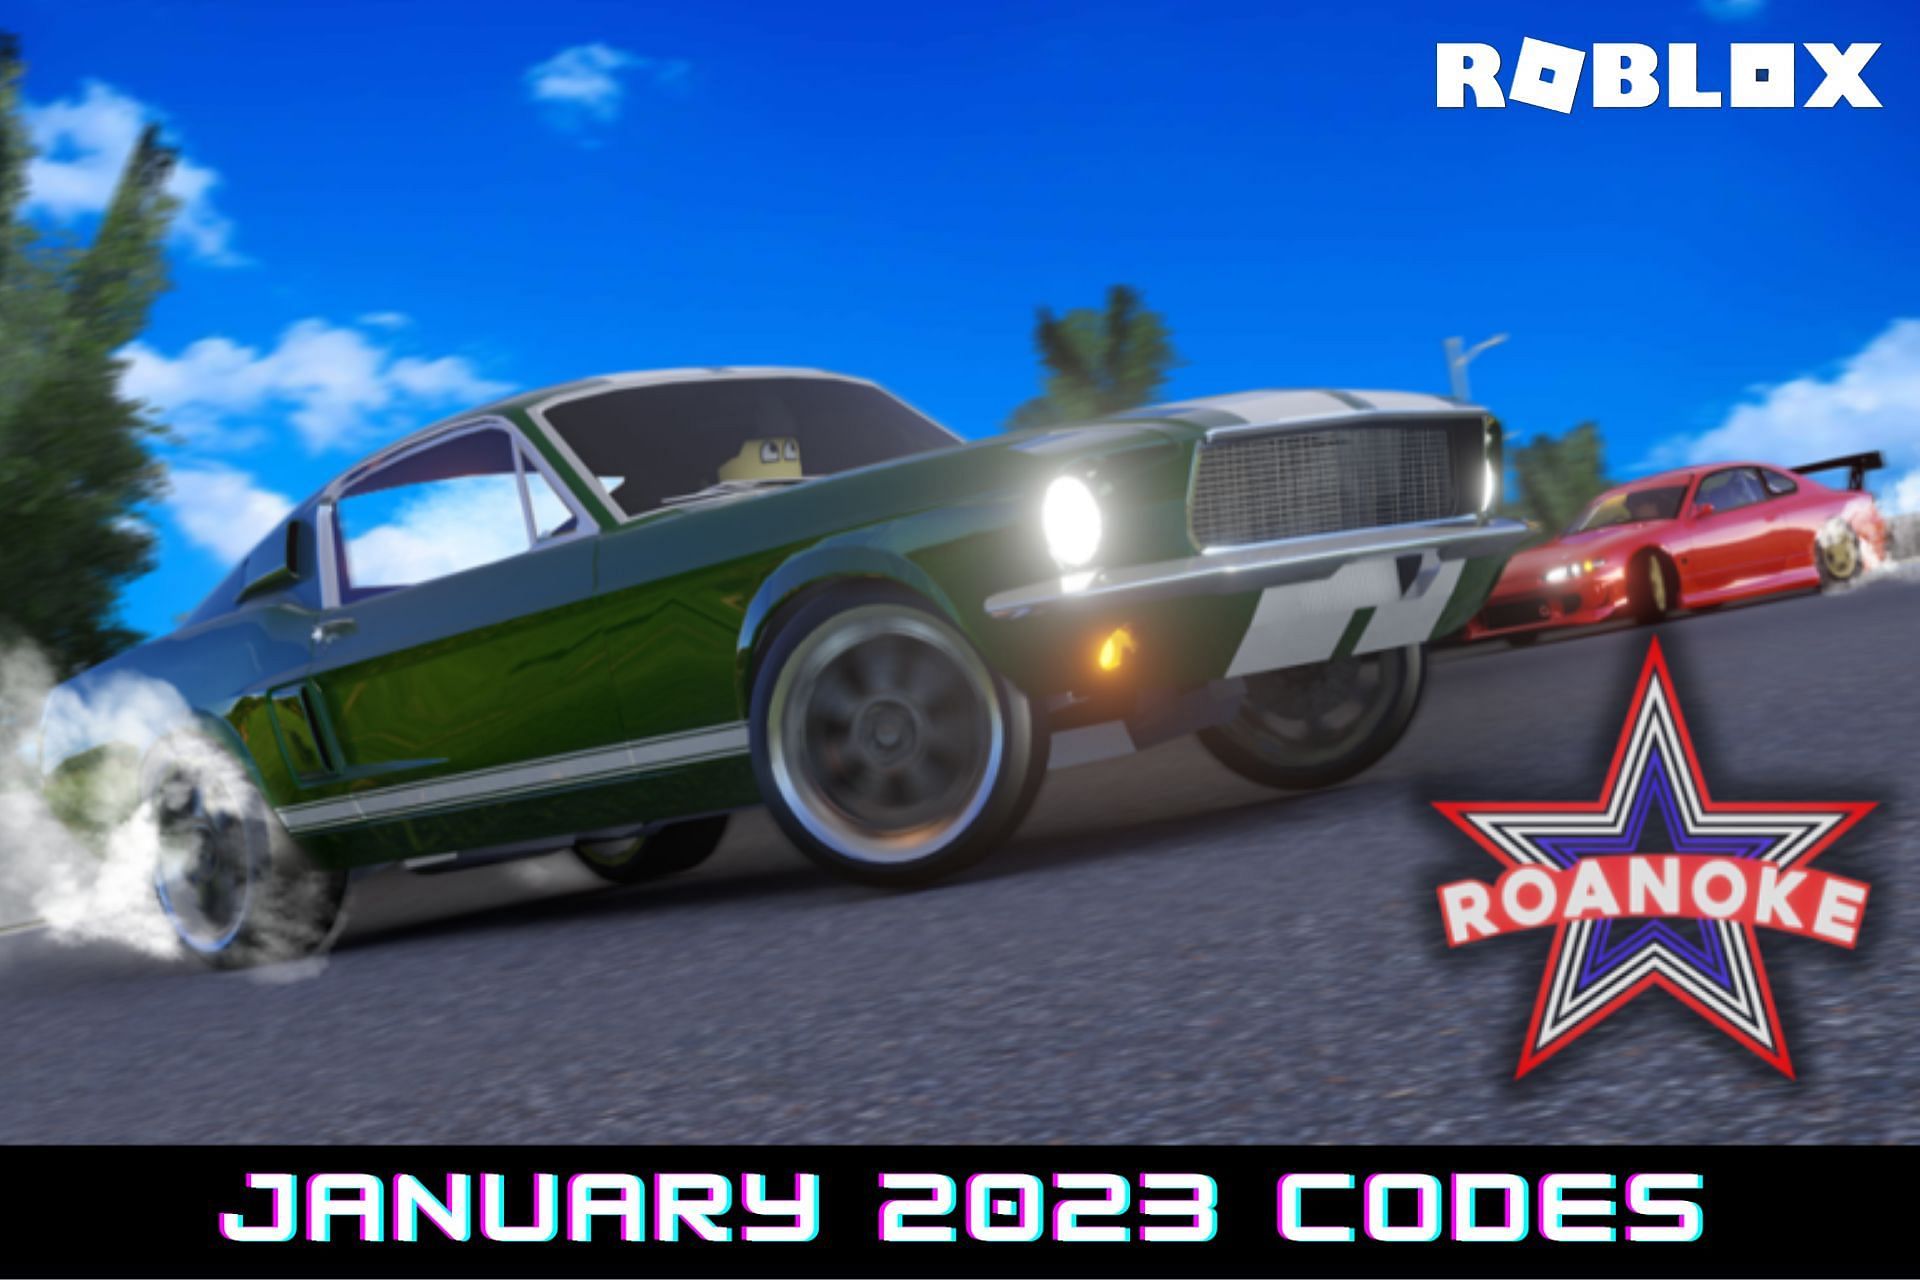 Roblox Roanoke codes for January 2023: Free cash